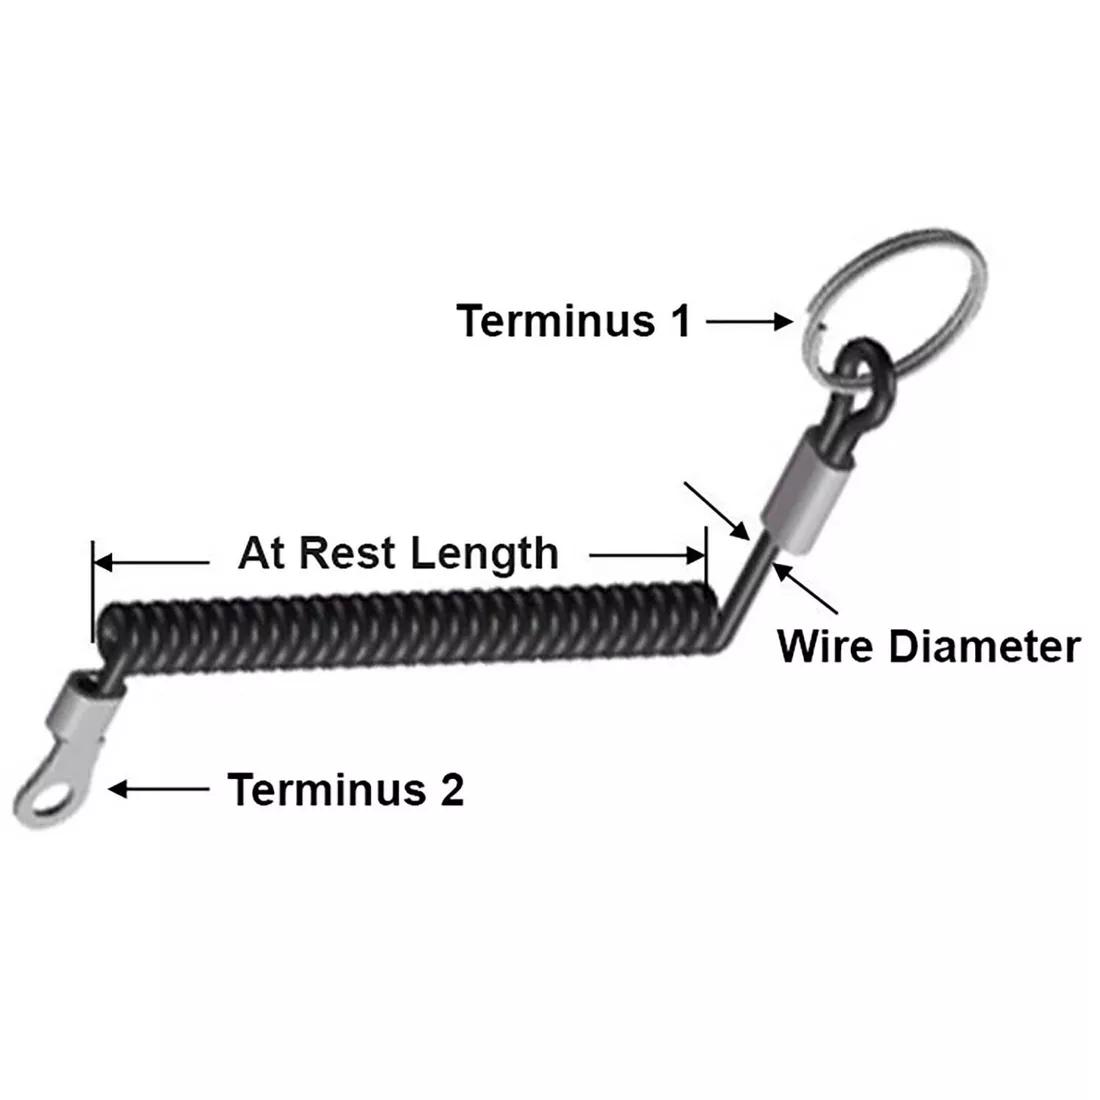 Coiled Lanyard - Line Drawing